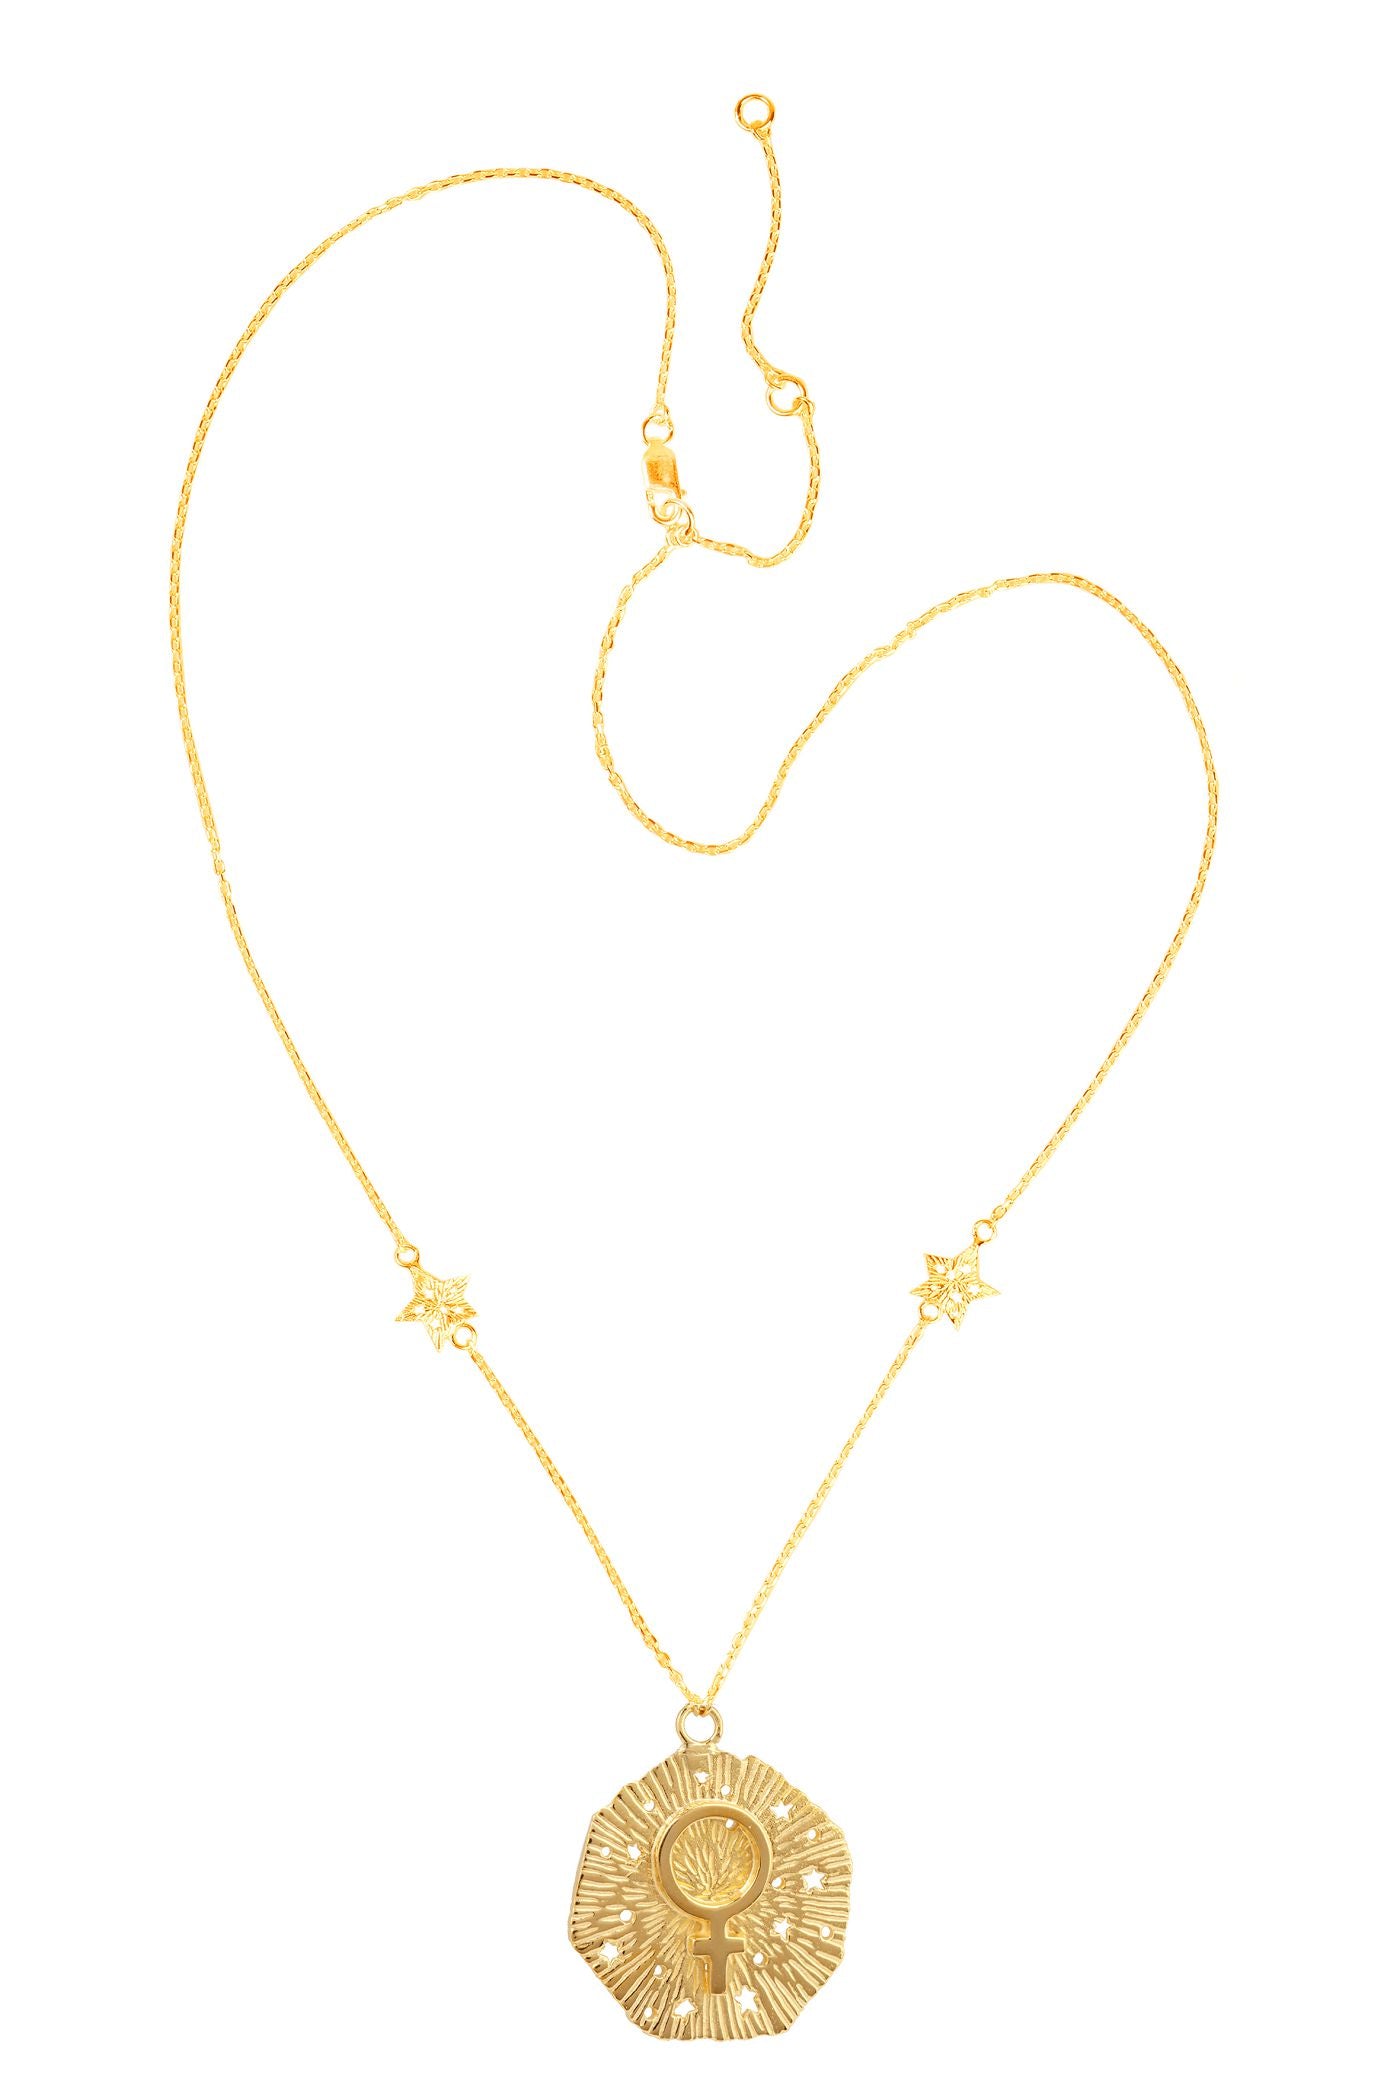 Venus with 2 stars on the chain necklace. 57 cm. Silver, gold-plated